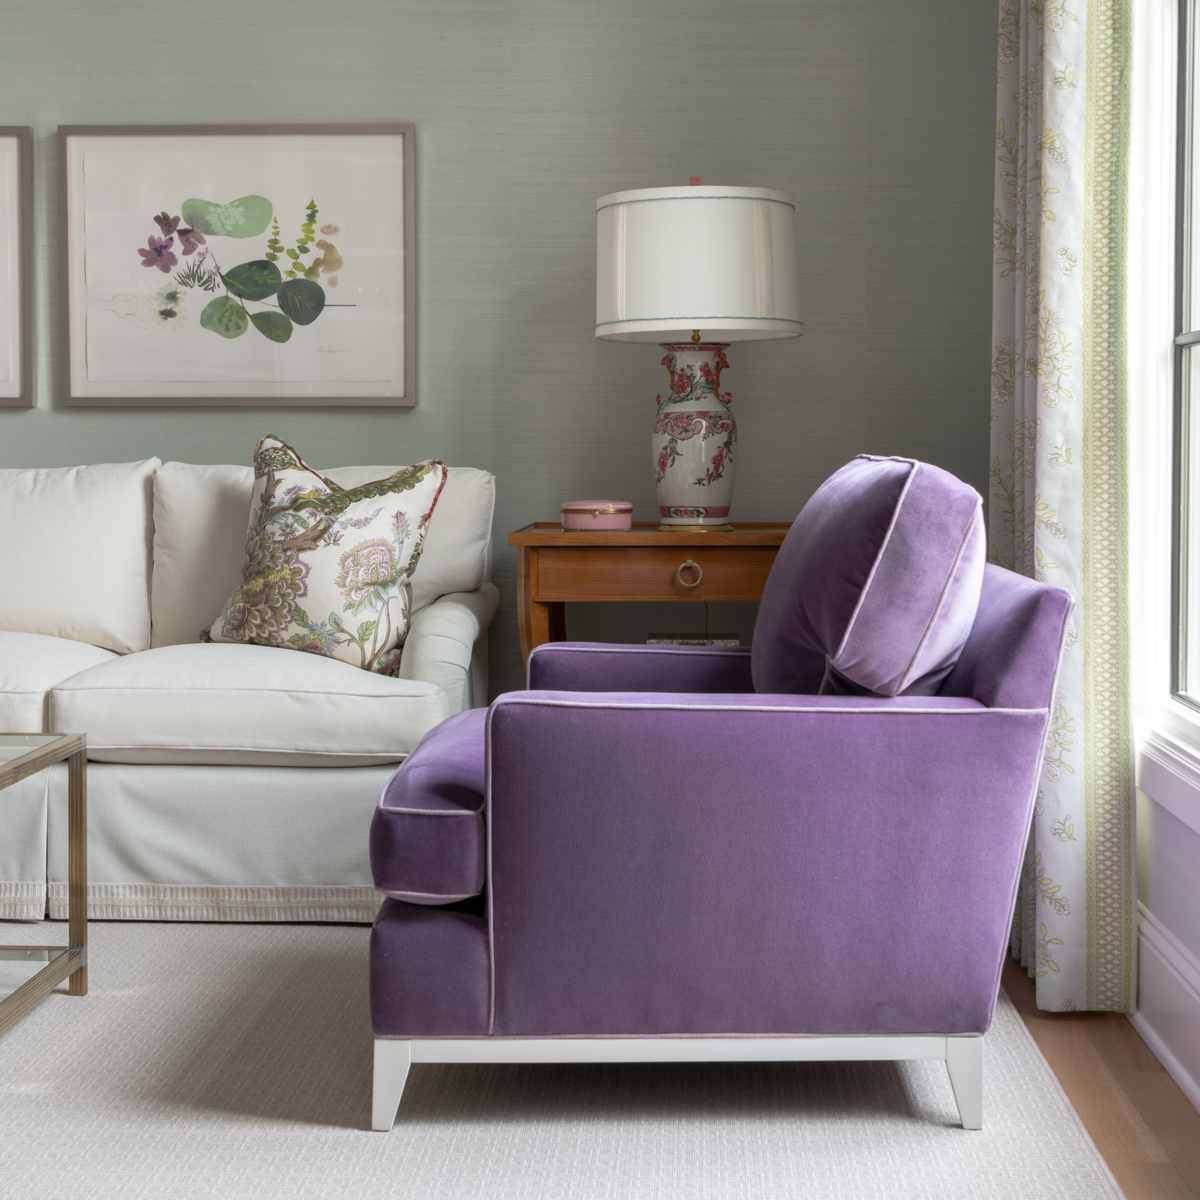 Living Room photo with purple lounge chair